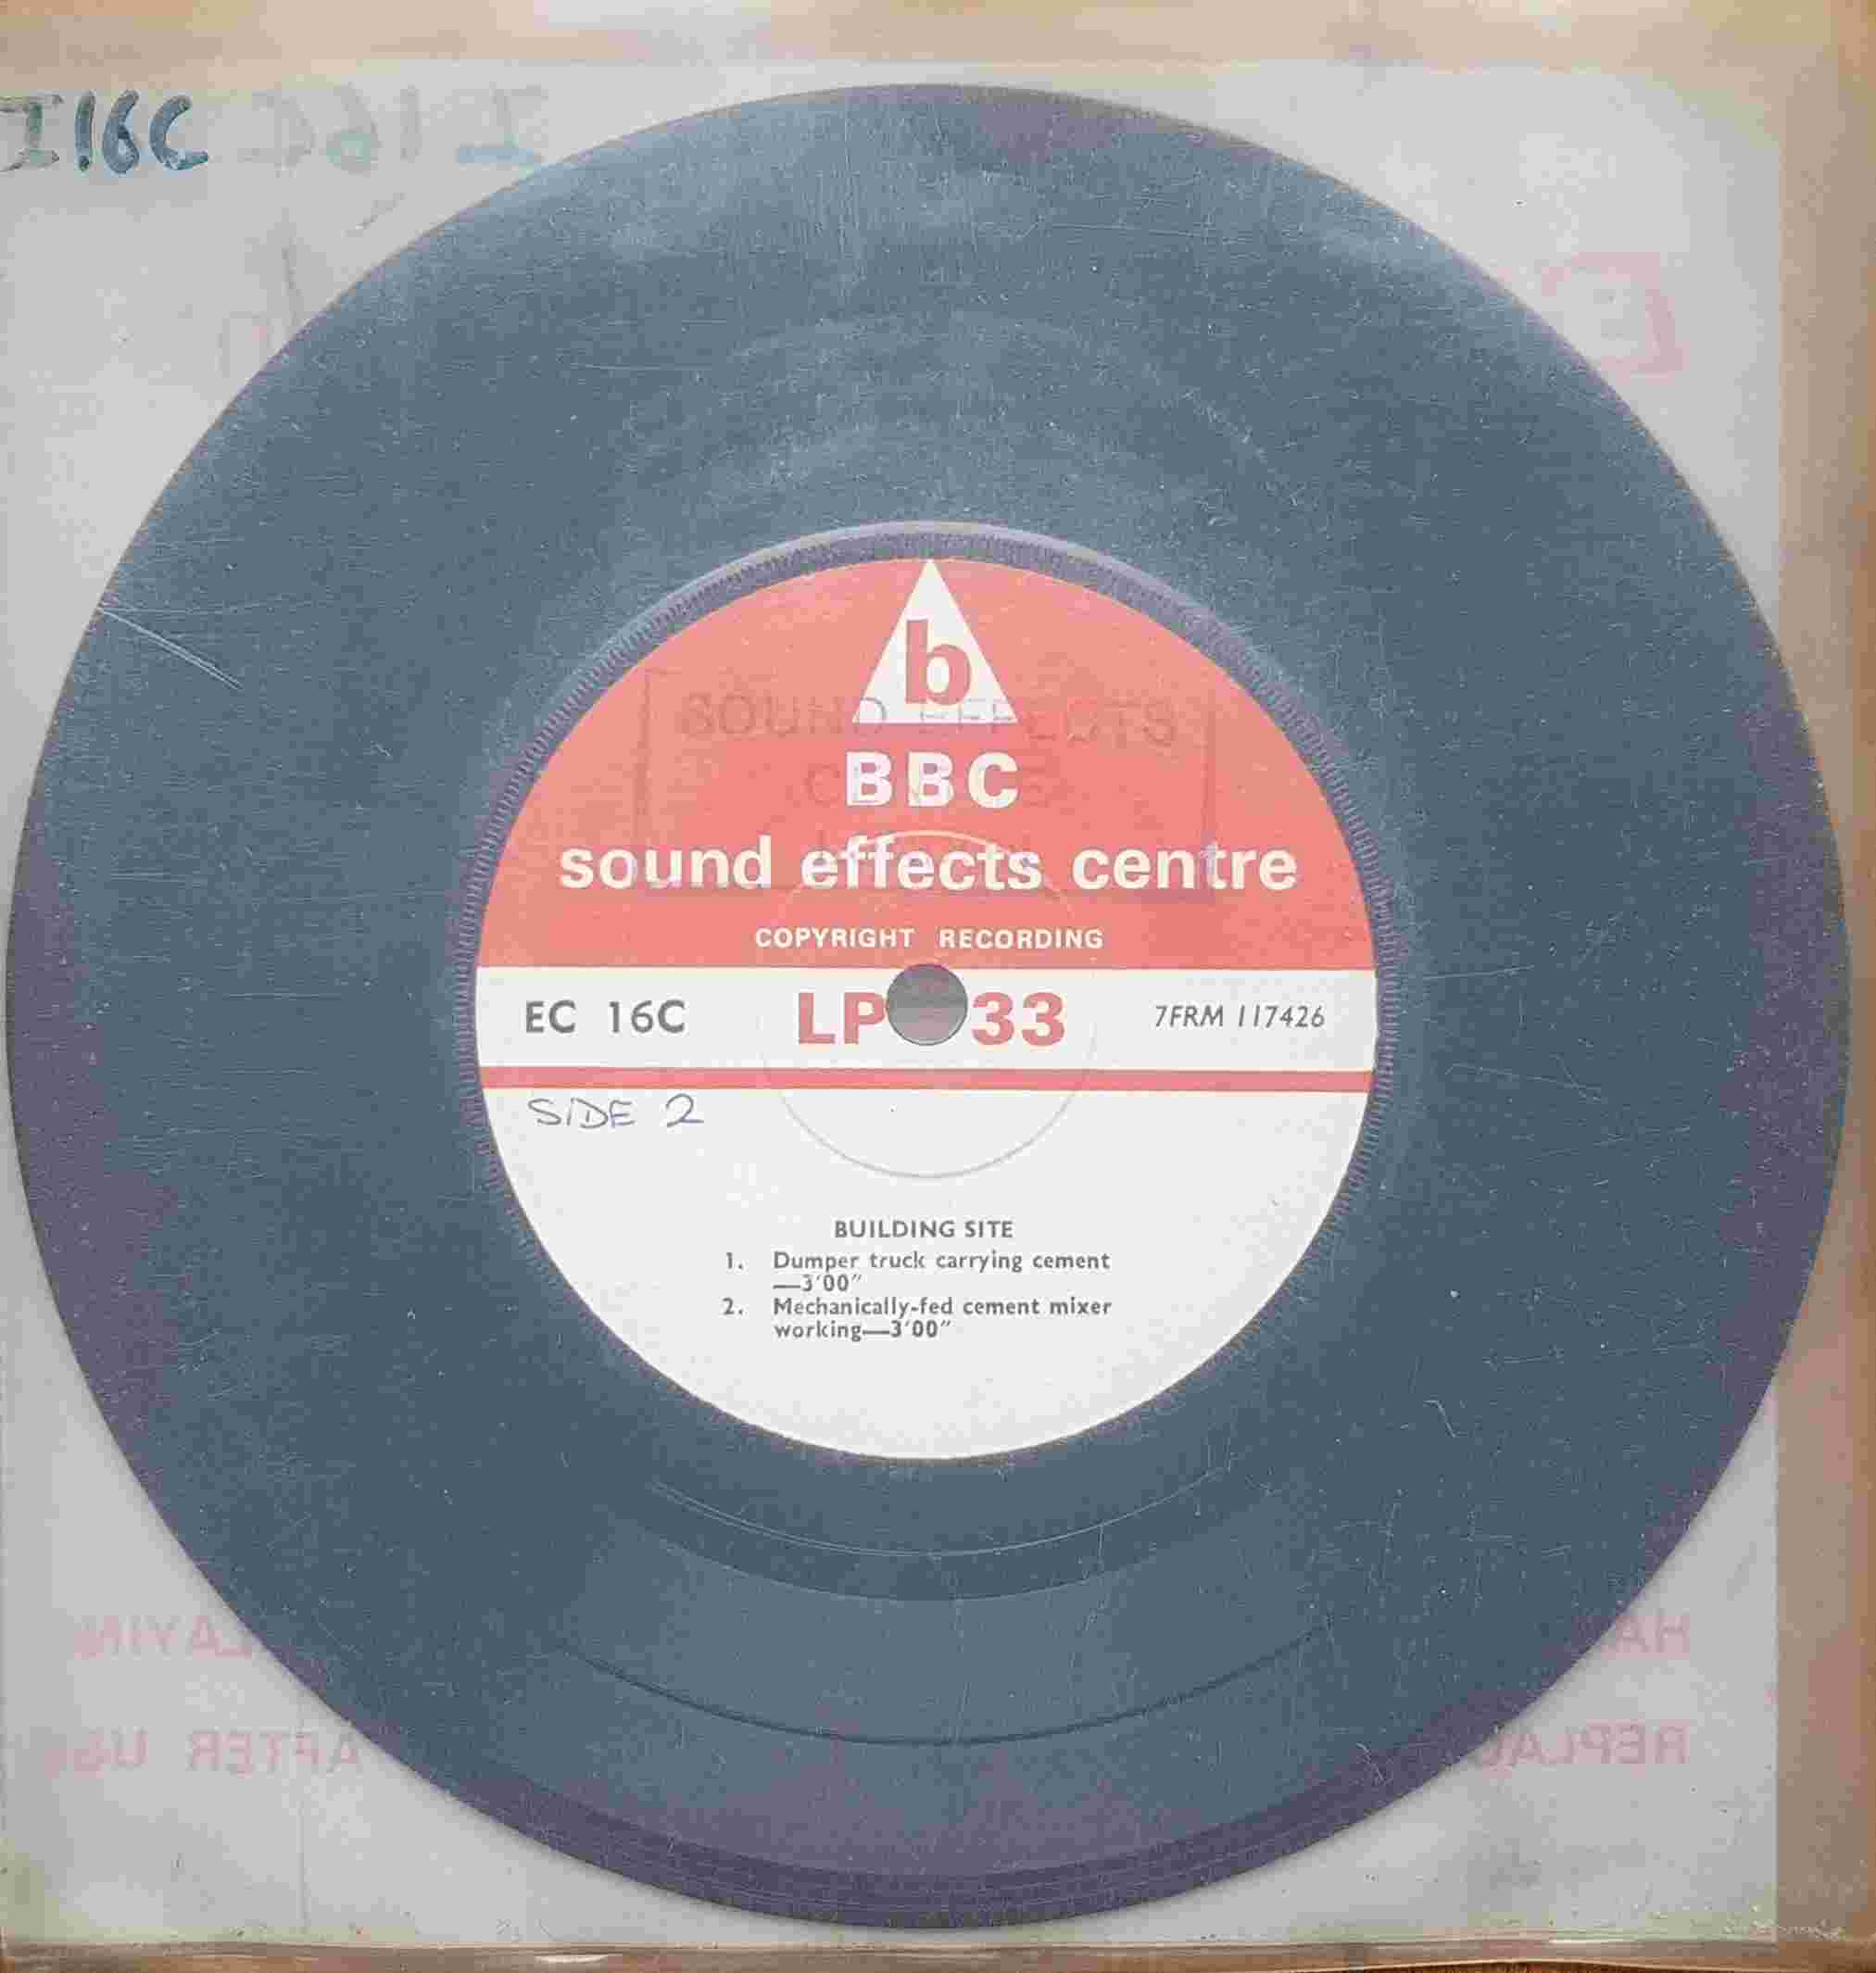 Picture of EC 16C Cement mixers / Building site by artist Not registered from the BBC records and Tapes library